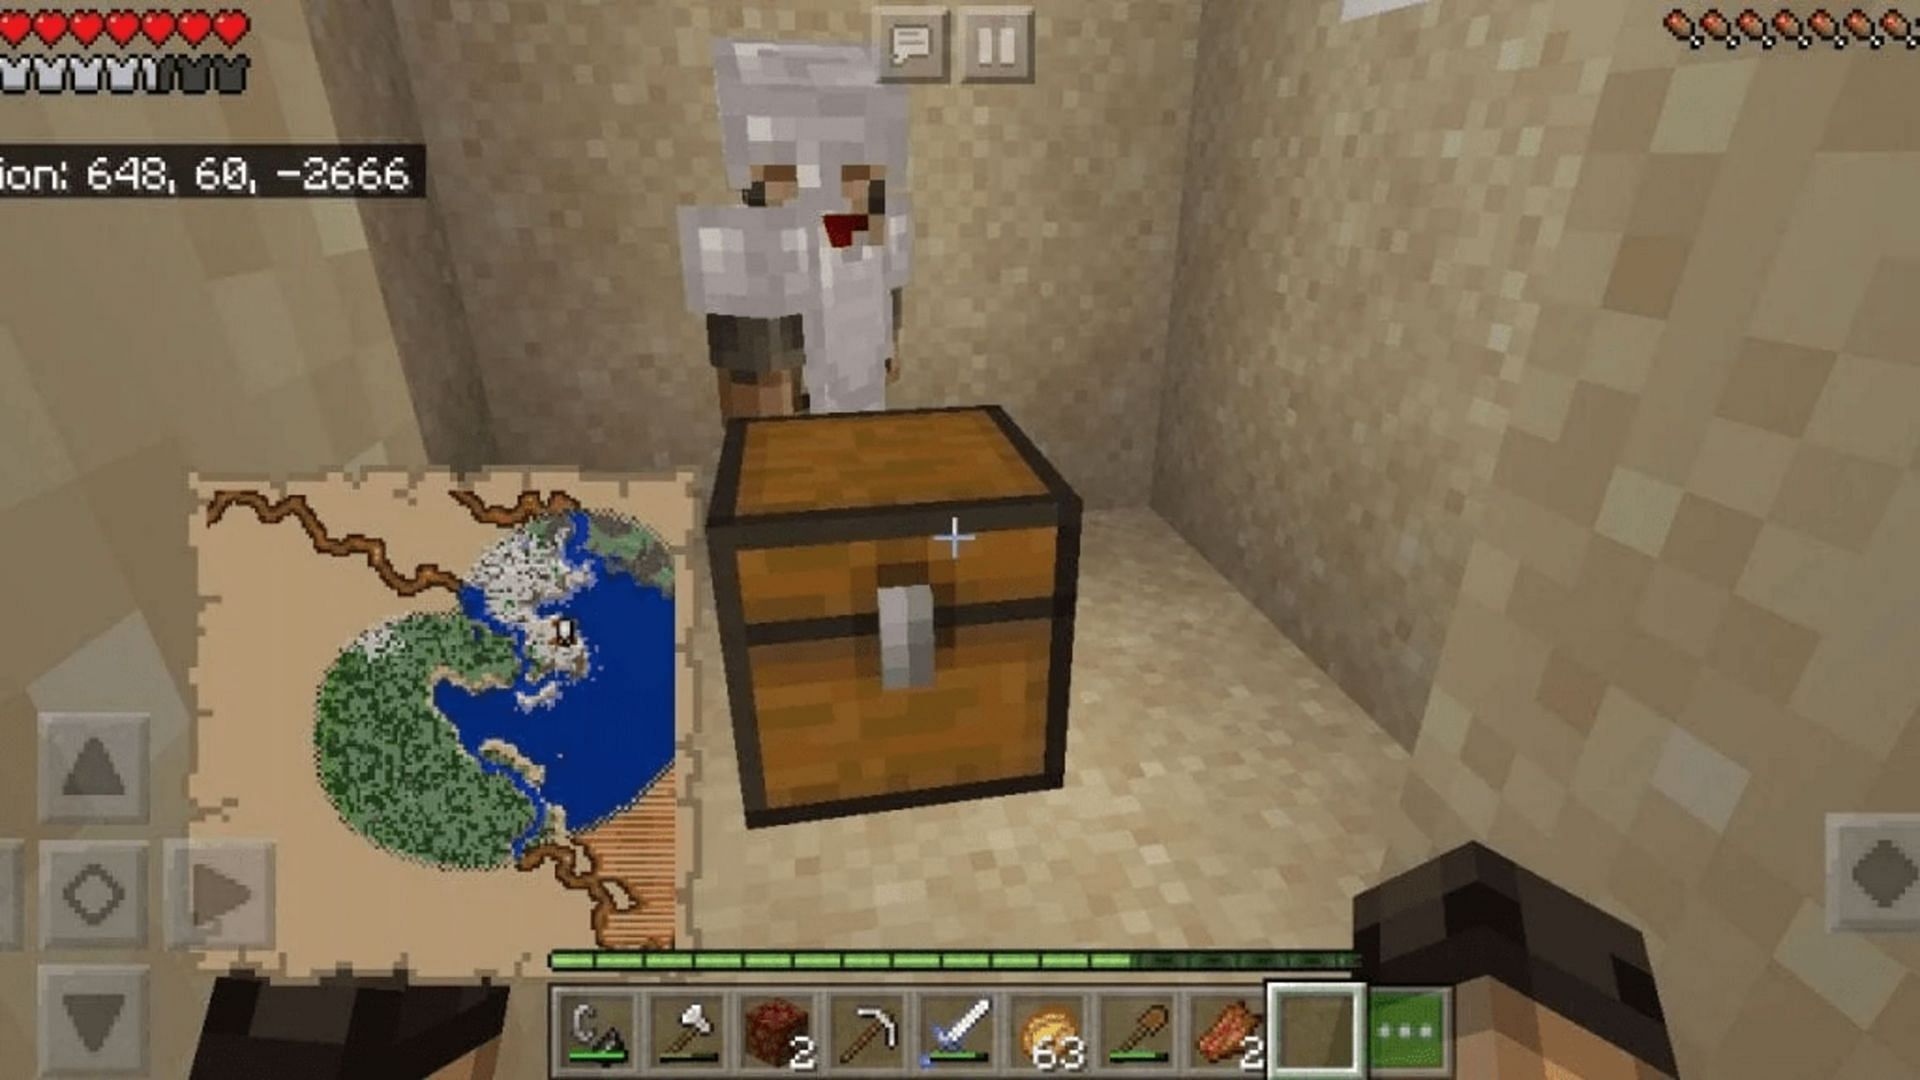 Players can essentially find treasure chests constantly by using the right coordinates (Image via Mojang)